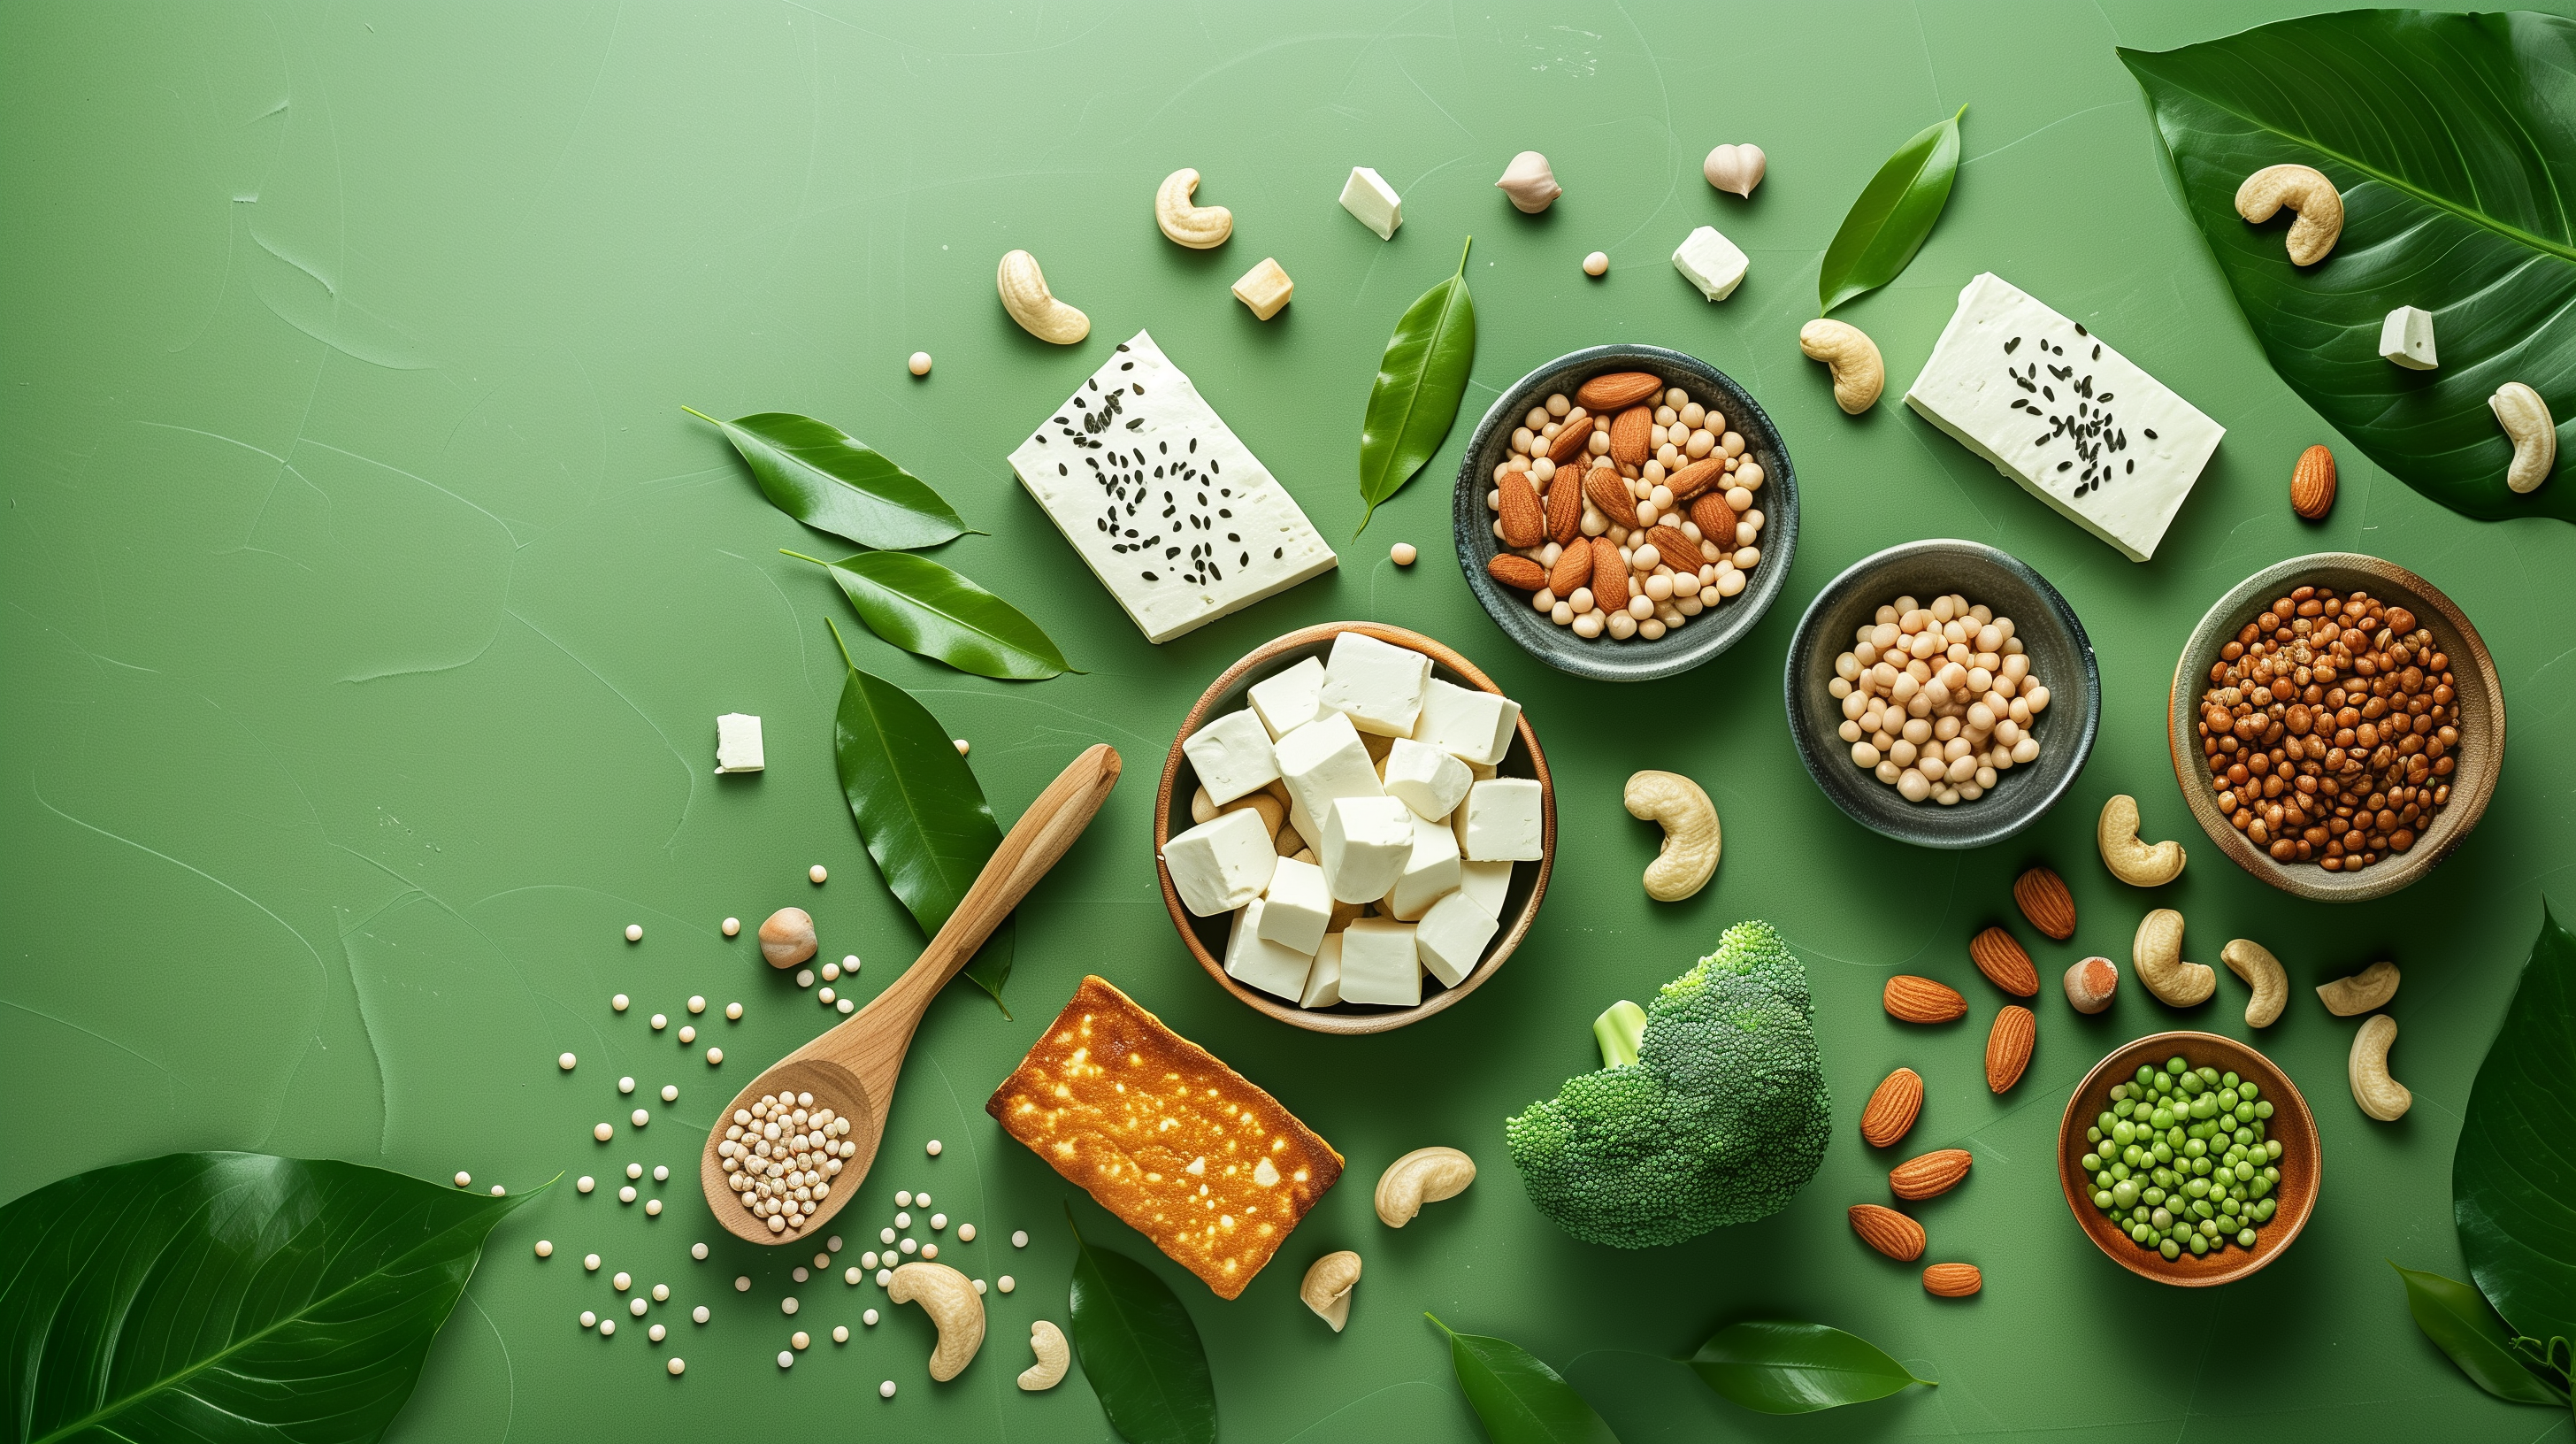 array of plant-based protein sources like tofu, tempeh, nuts, seeds, and legumes